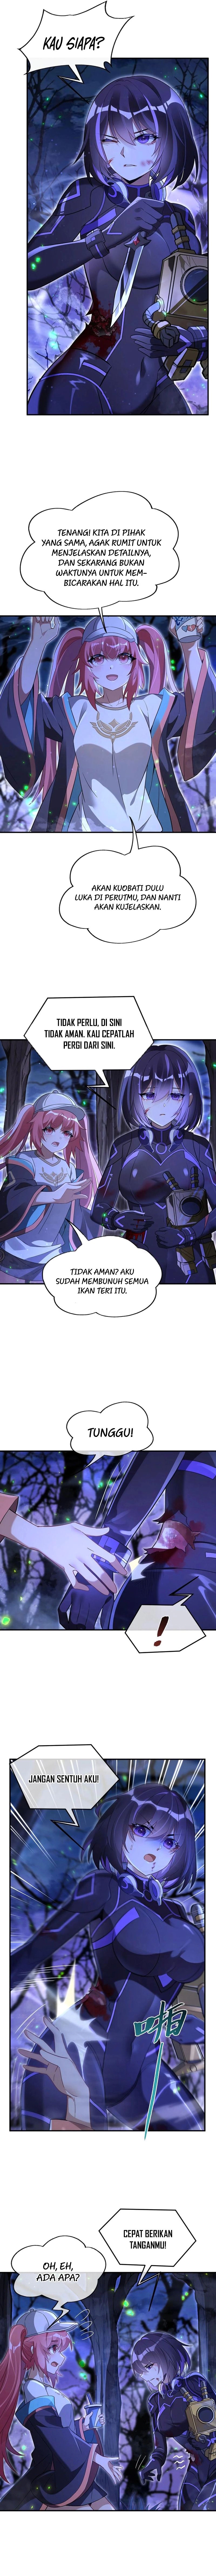 Dilarang COPAS - situs resmi www.mangacanblog.com - Komik my female apprentices are all big shots from the future 259 - chapter 259 260 Indonesia my female apprentices are all big shots from the future 259 - chapter 259 Terbaru 2|Baca Manga Komik Indonesia|Mangacan